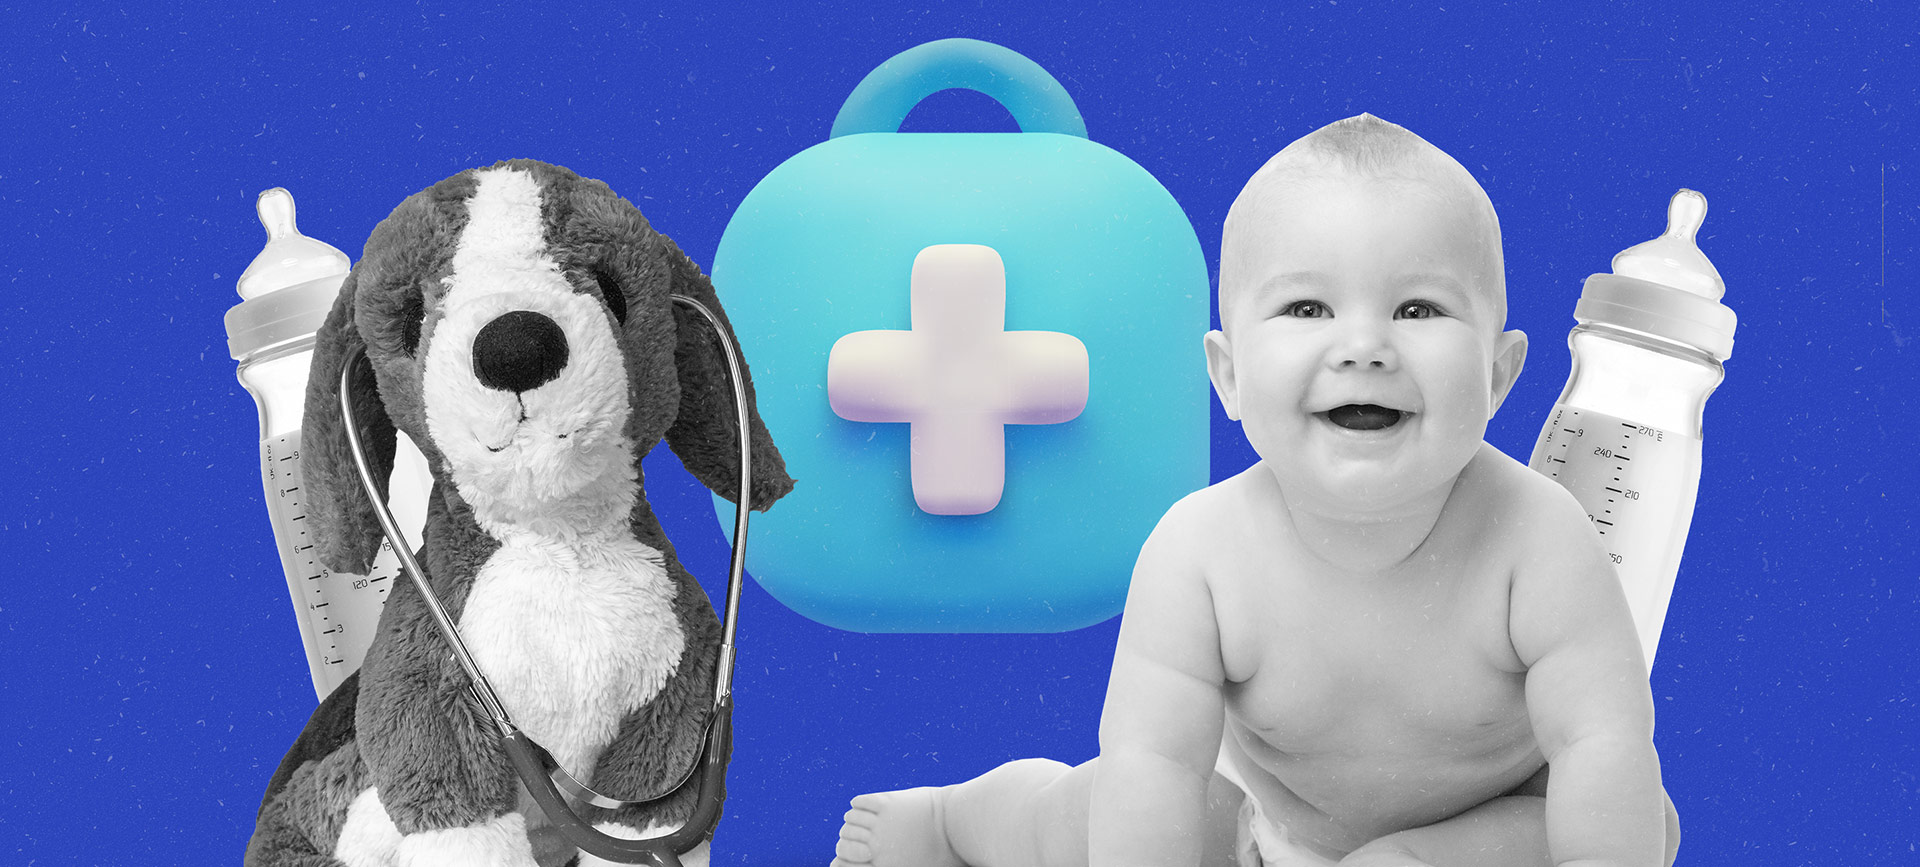 A stuffed dog with a stethoscope is next to a blue medical kit, a baby, and two bottles of formula against a blue background.